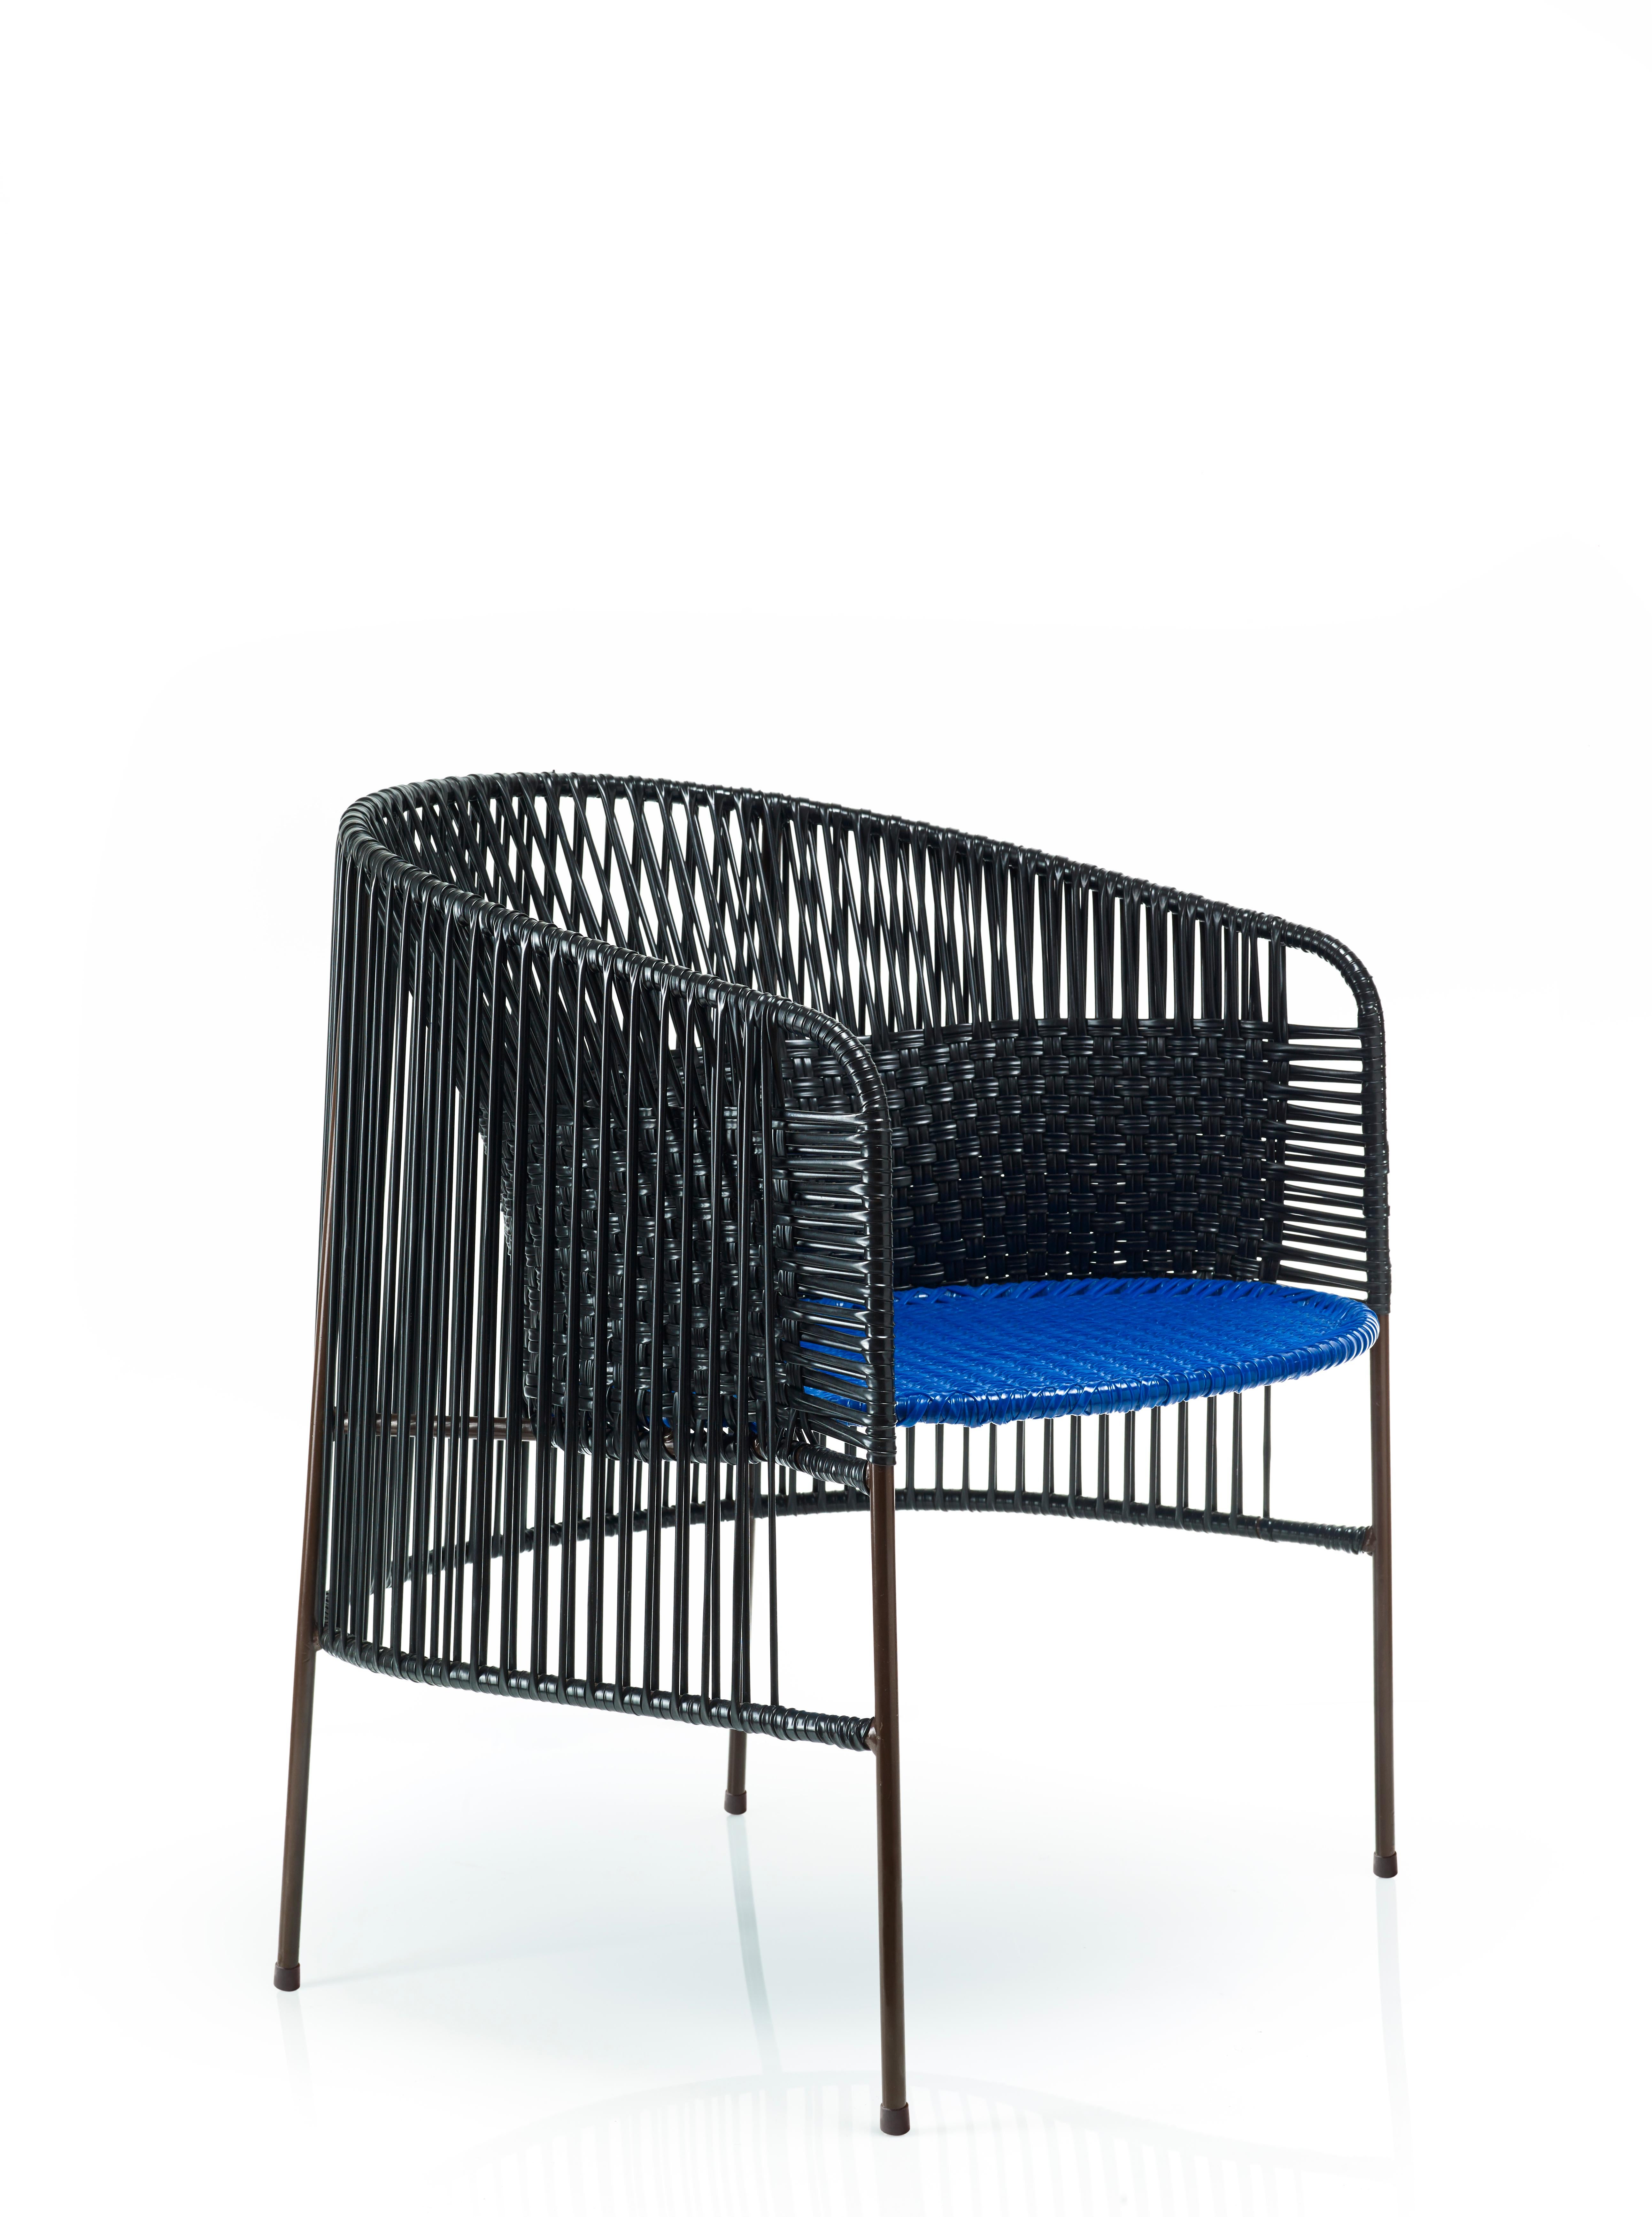 Set of 4 black Caribe lounge chair by Sebastian Herkner.
Materials: Galvanized and powder-coated tubular steel. PVC strings are made from recycled plastic.
Technique: Made from recycled plastic and weaved by local craftspeople in Colombia.